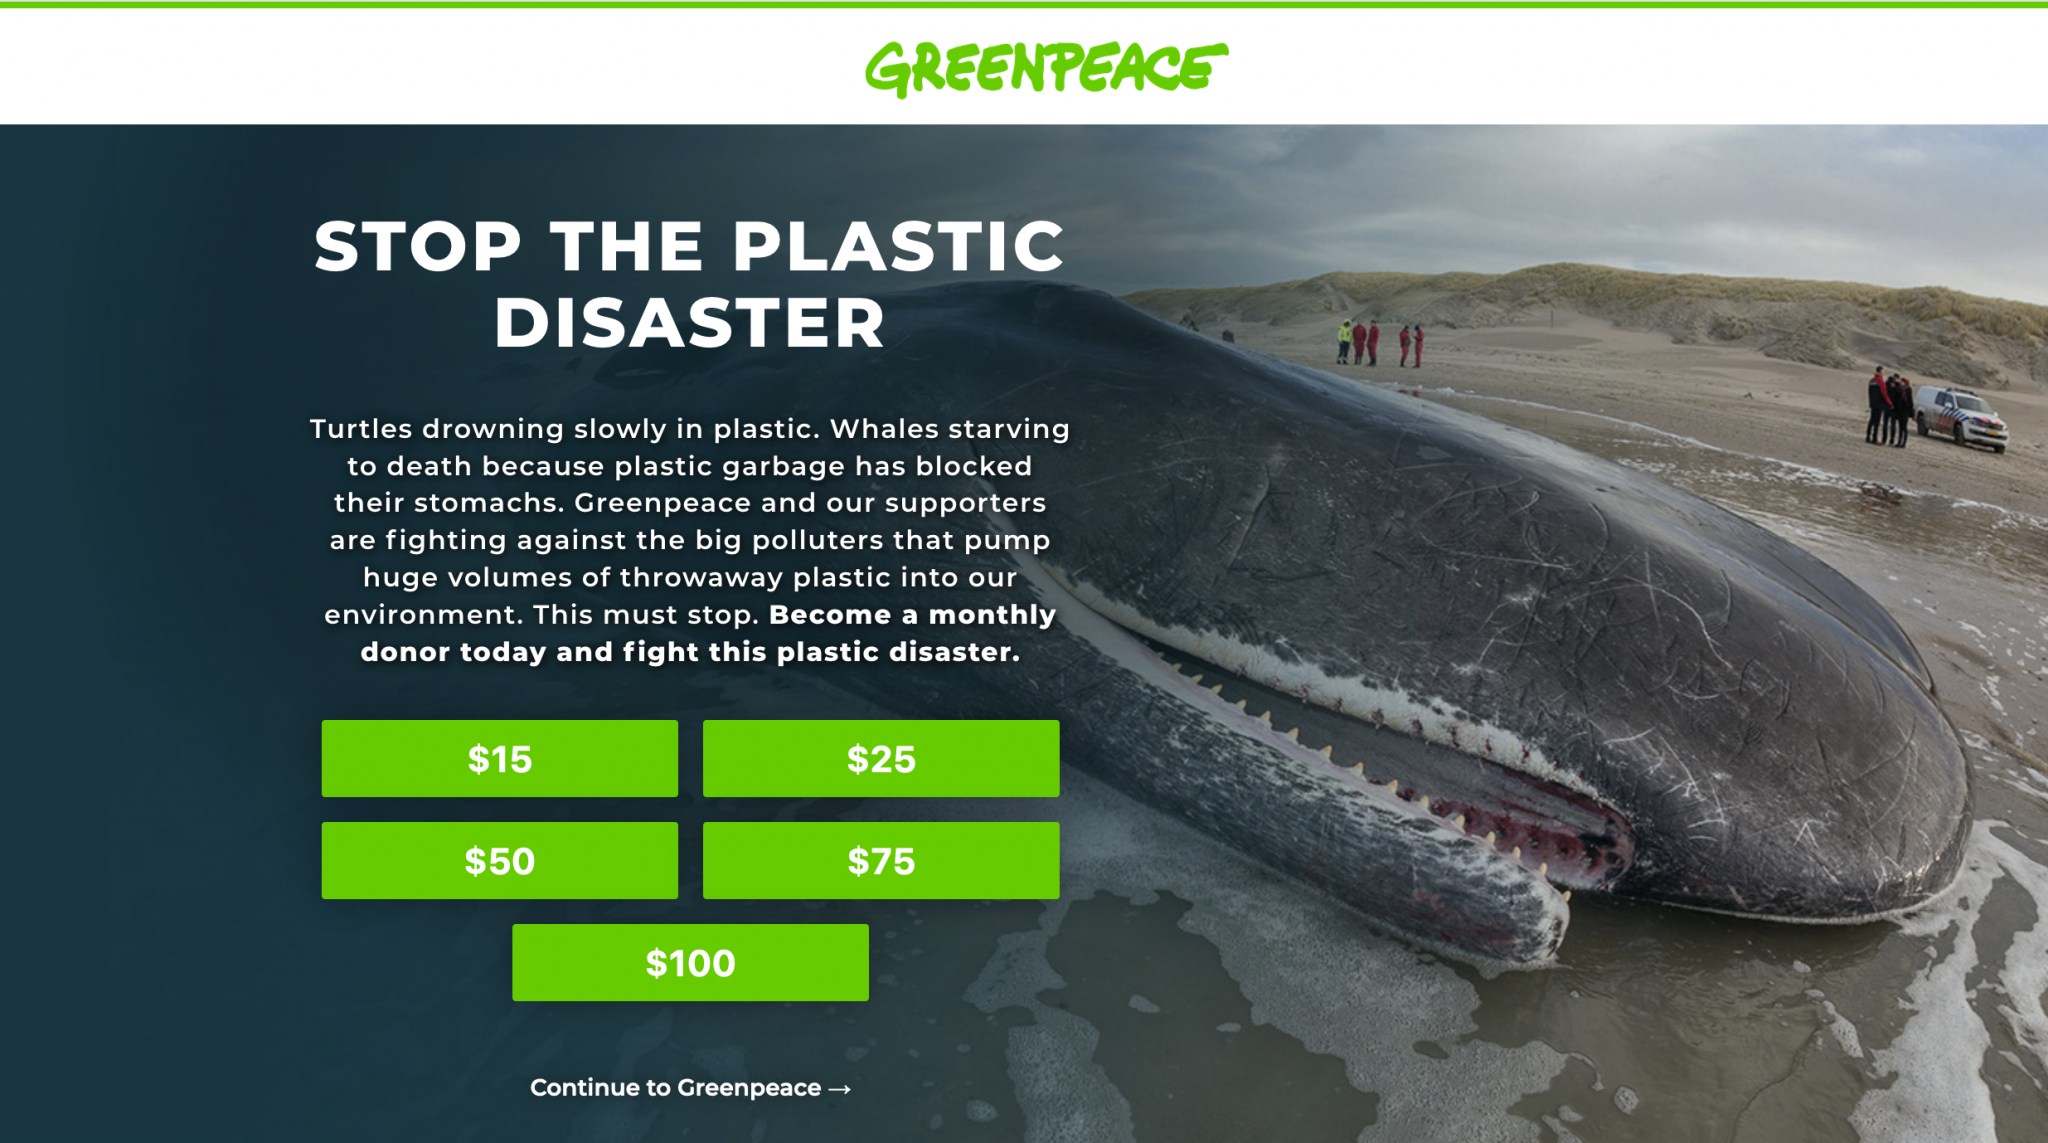 Greenpeace website based on the green color